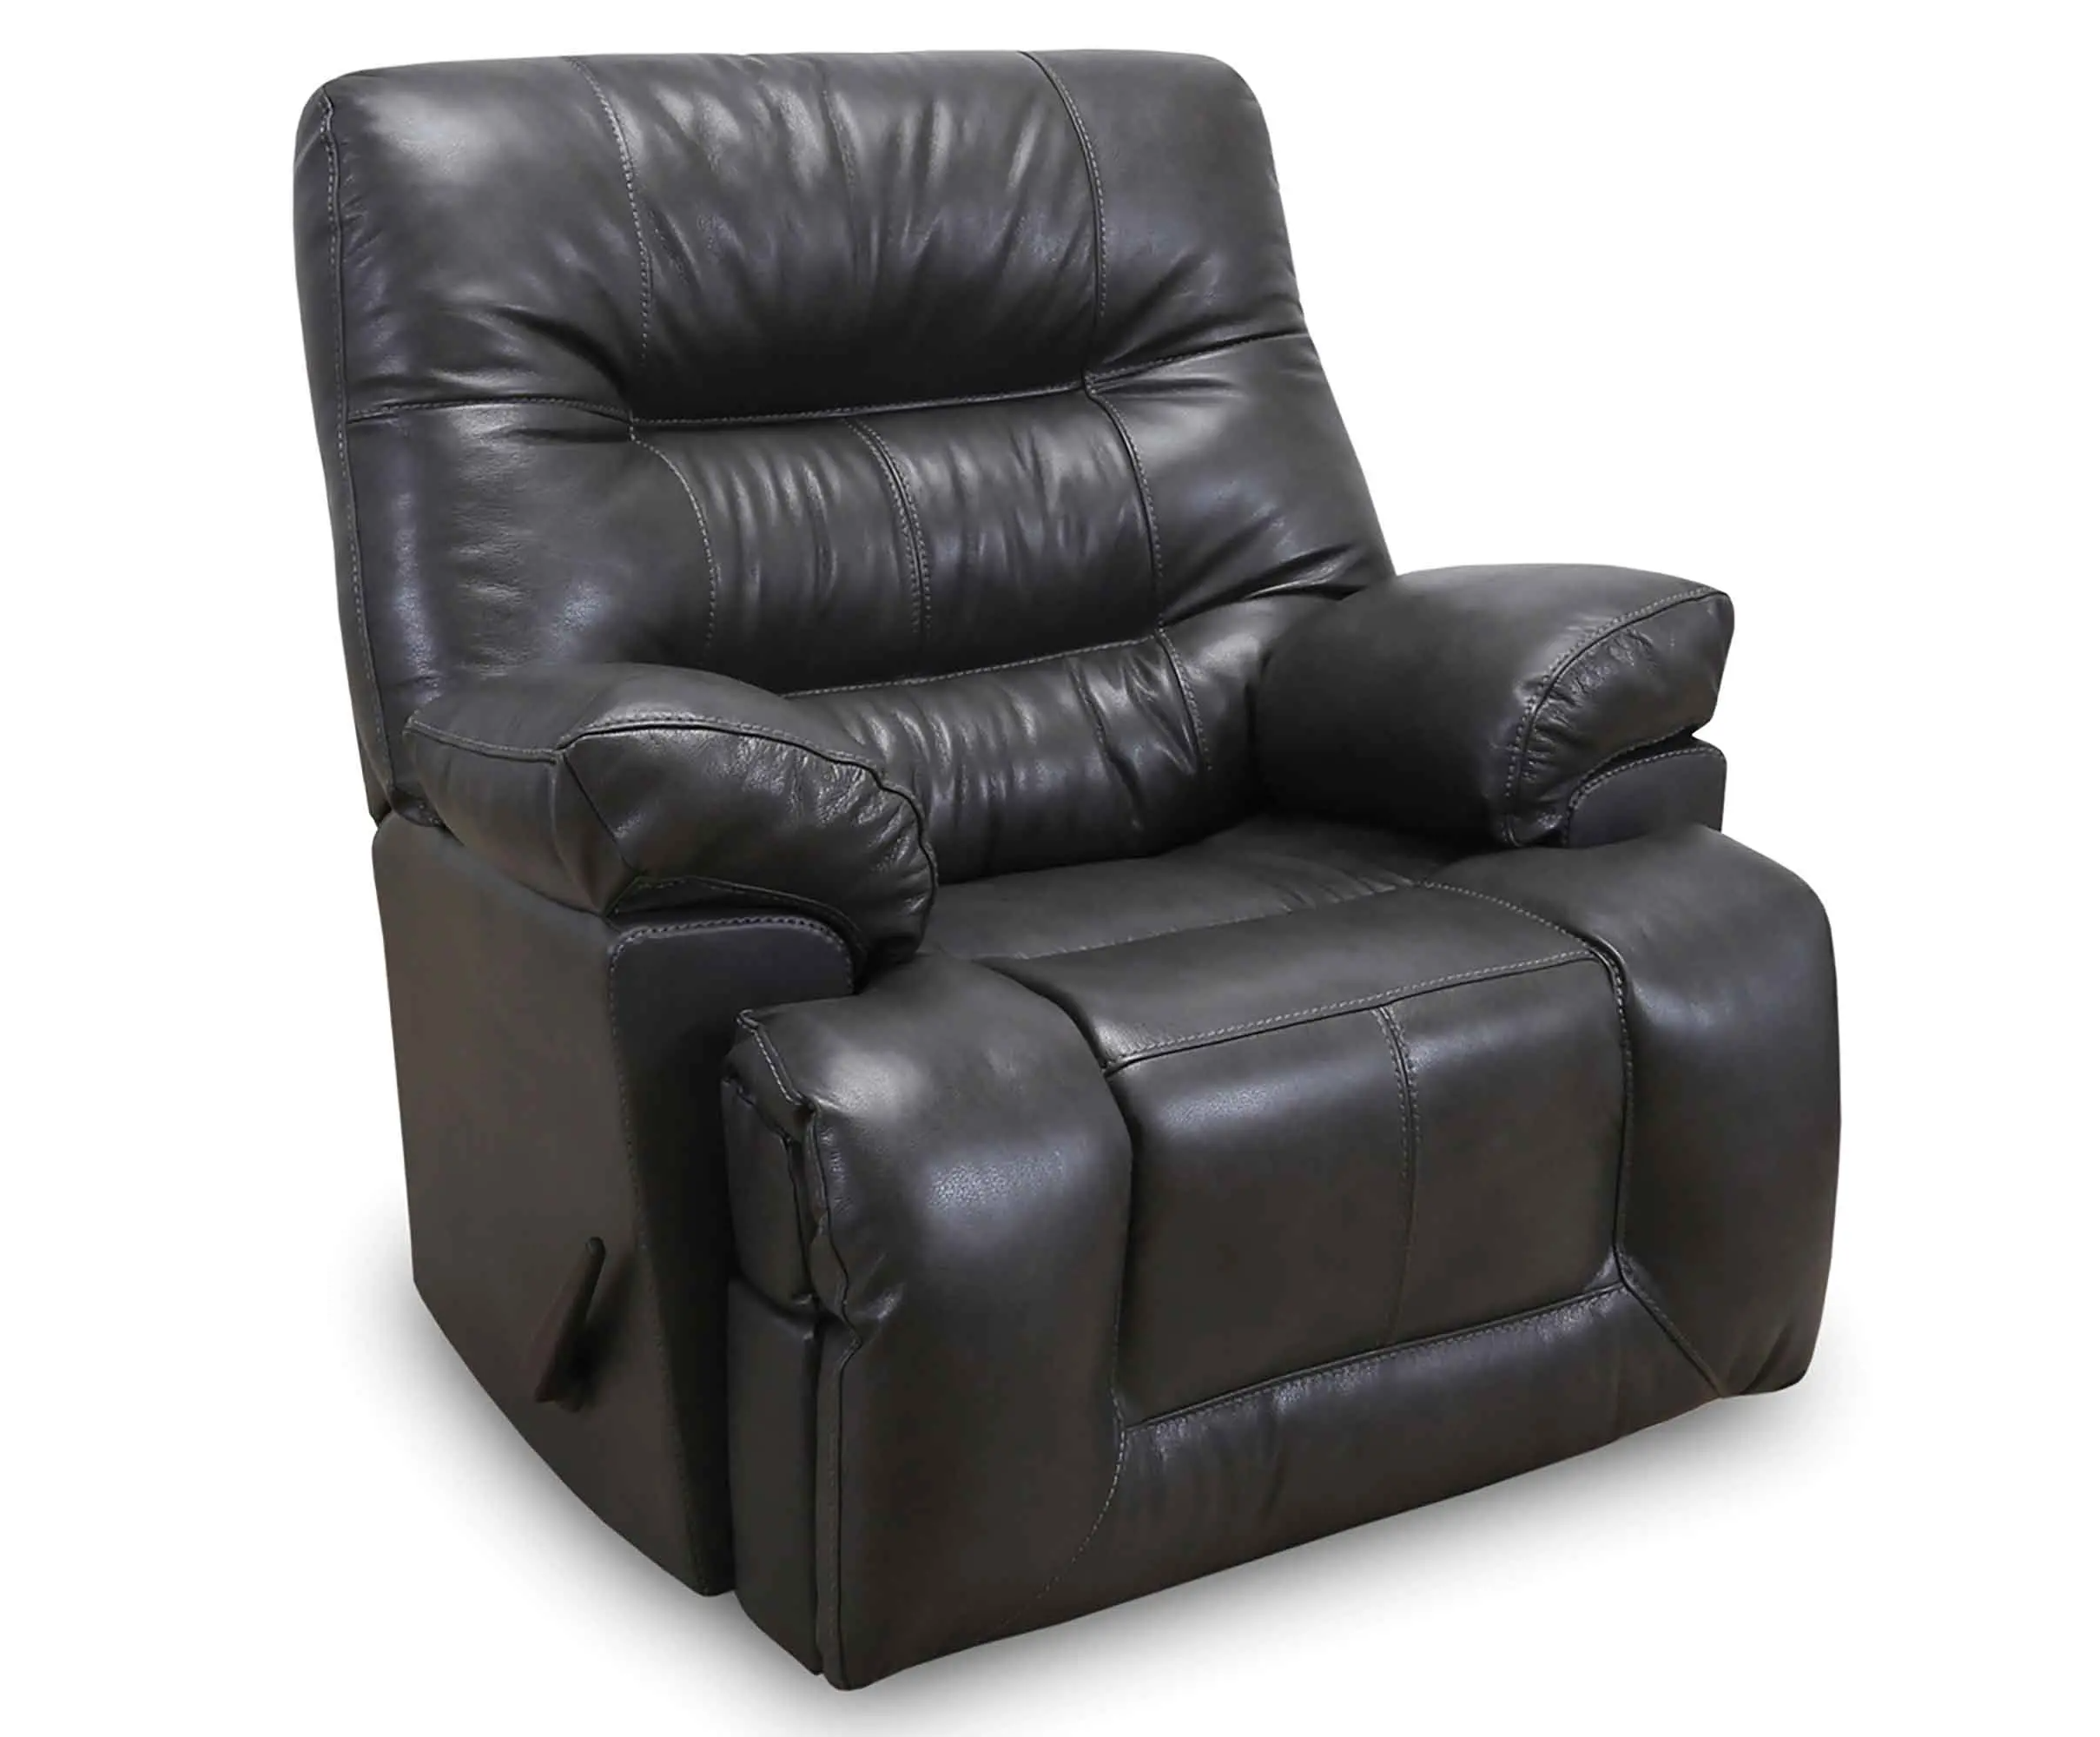 What Are The Different Types Of Recliners?